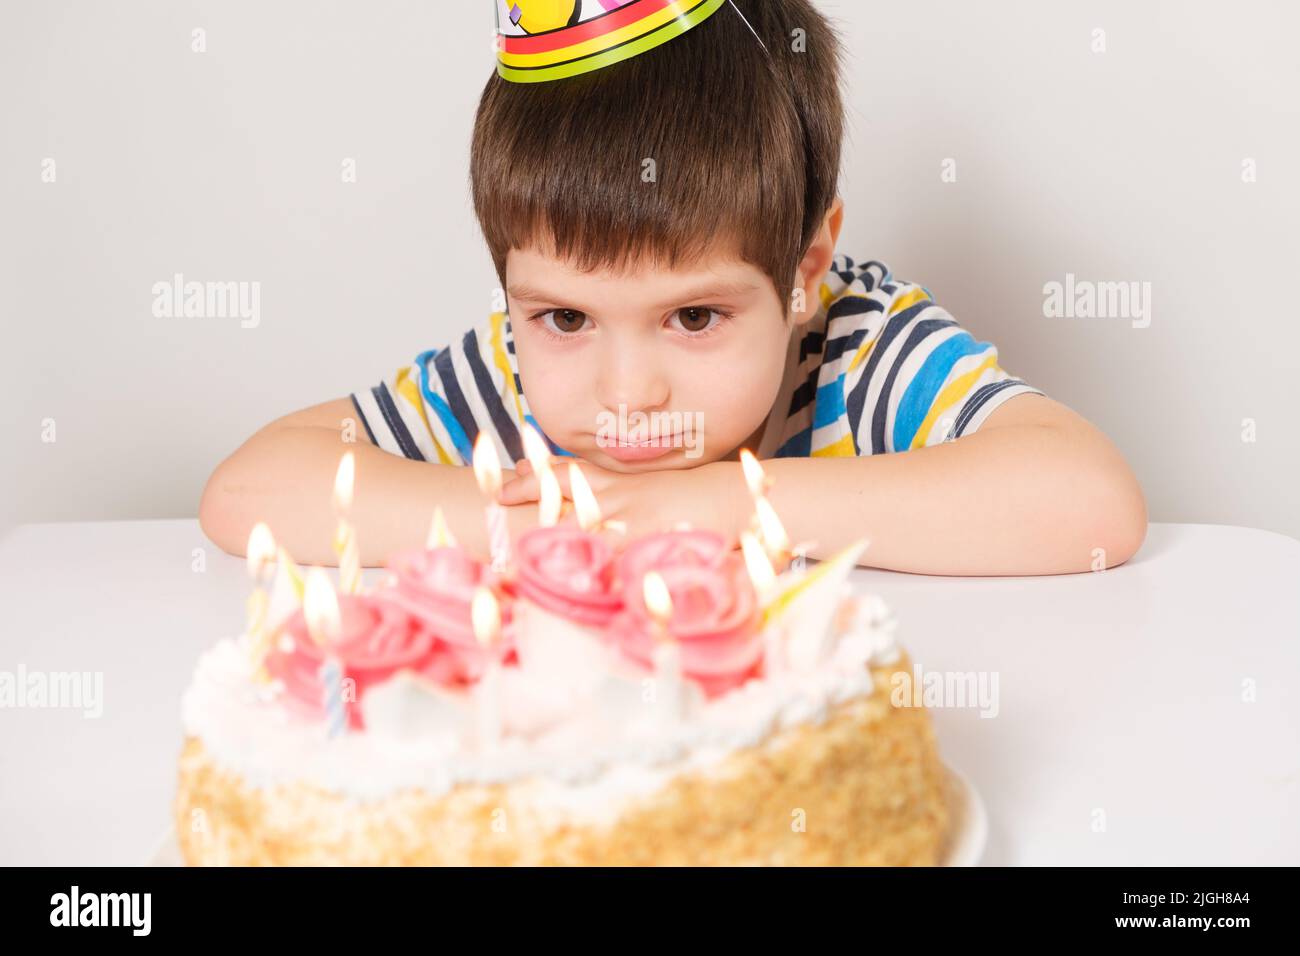 A handsome boy celebrates a birthday, sits in front of a cake with ...